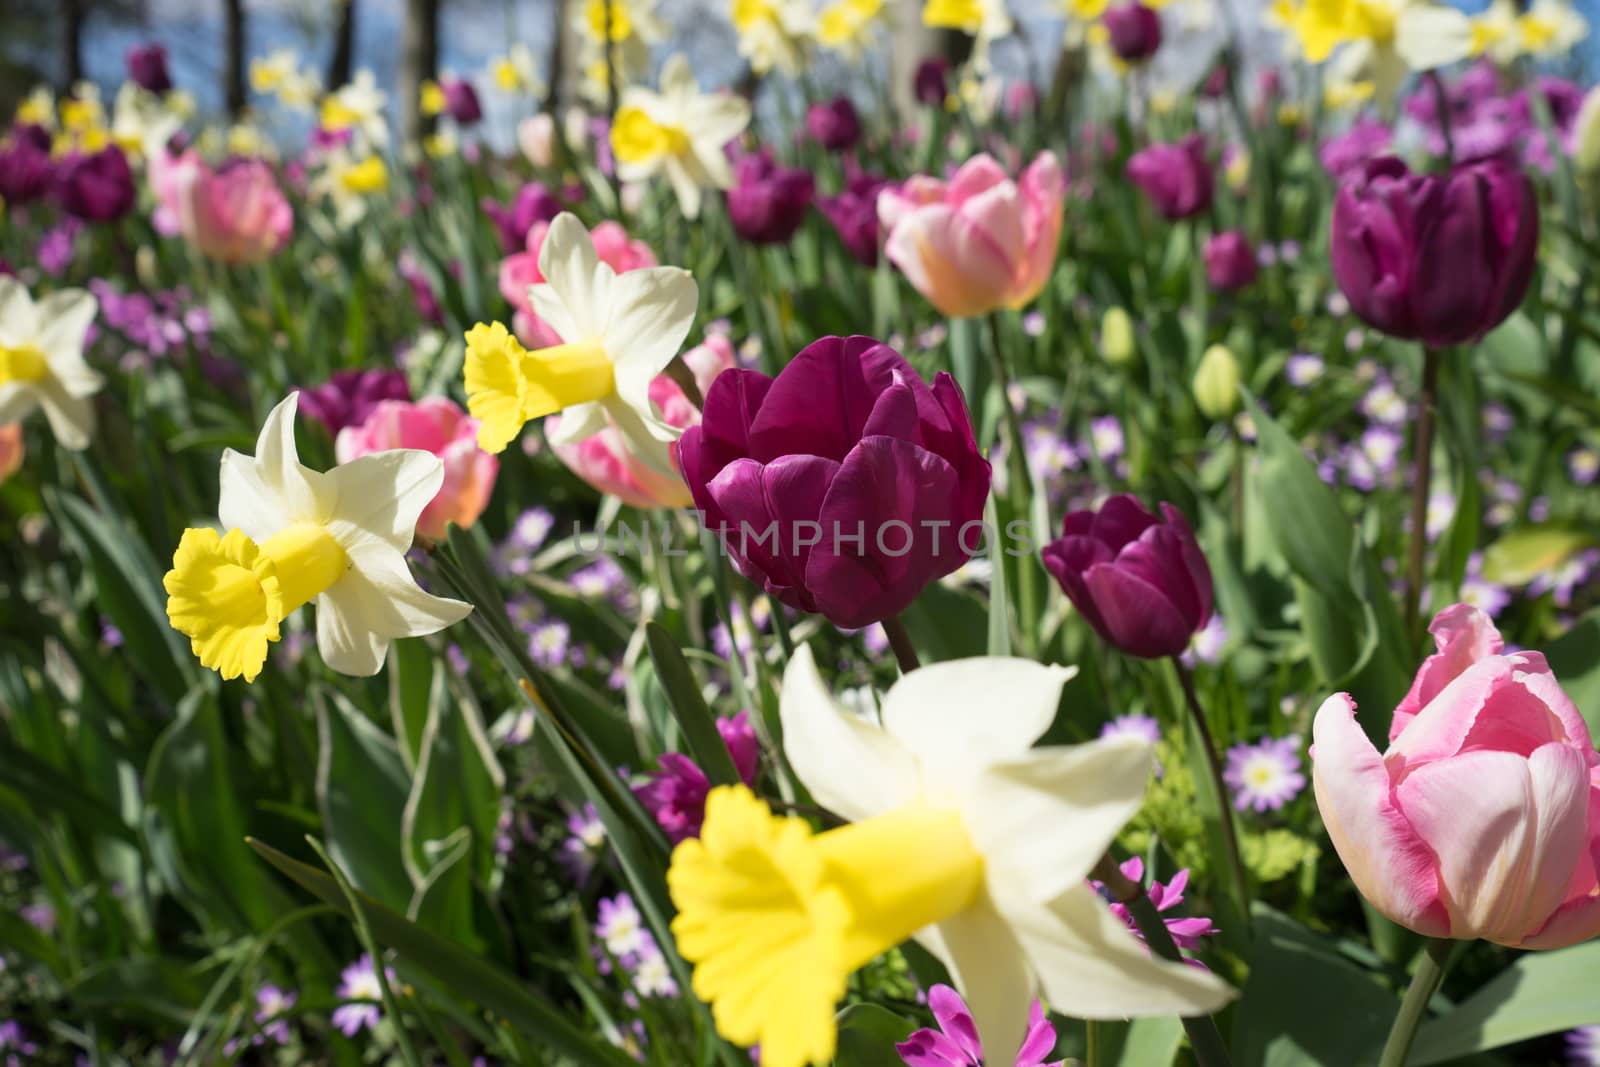 Yellow daffodil and pink tulip flowers in a garden in Lisse, Net by ramana16